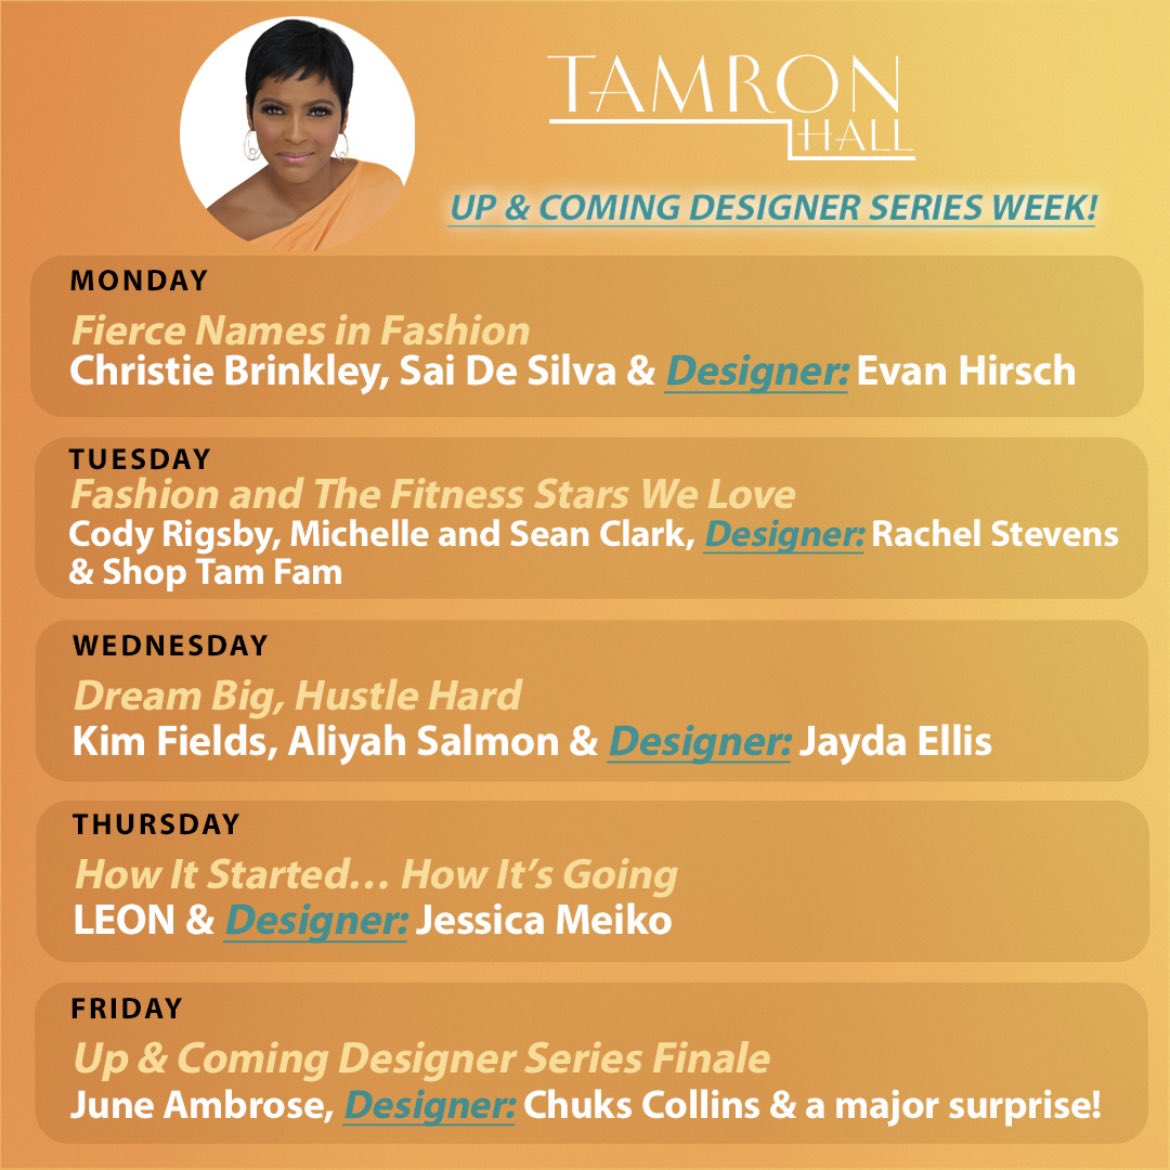 THIS WEEK ON “Tamron Hall”: MON: Christie Brinkley, Sai De Silva and Evan Hirsch TUES: Cody Rigsby, Michelle and Sean Clark, Rachel Stevens and Shop Tam Fam WED: @KimVFields, Aliyah Salmon and Jayda Ellis THURS: @justleon and Jessica Meiko FRI: @juneAmbrose, Chuks Collins and a…